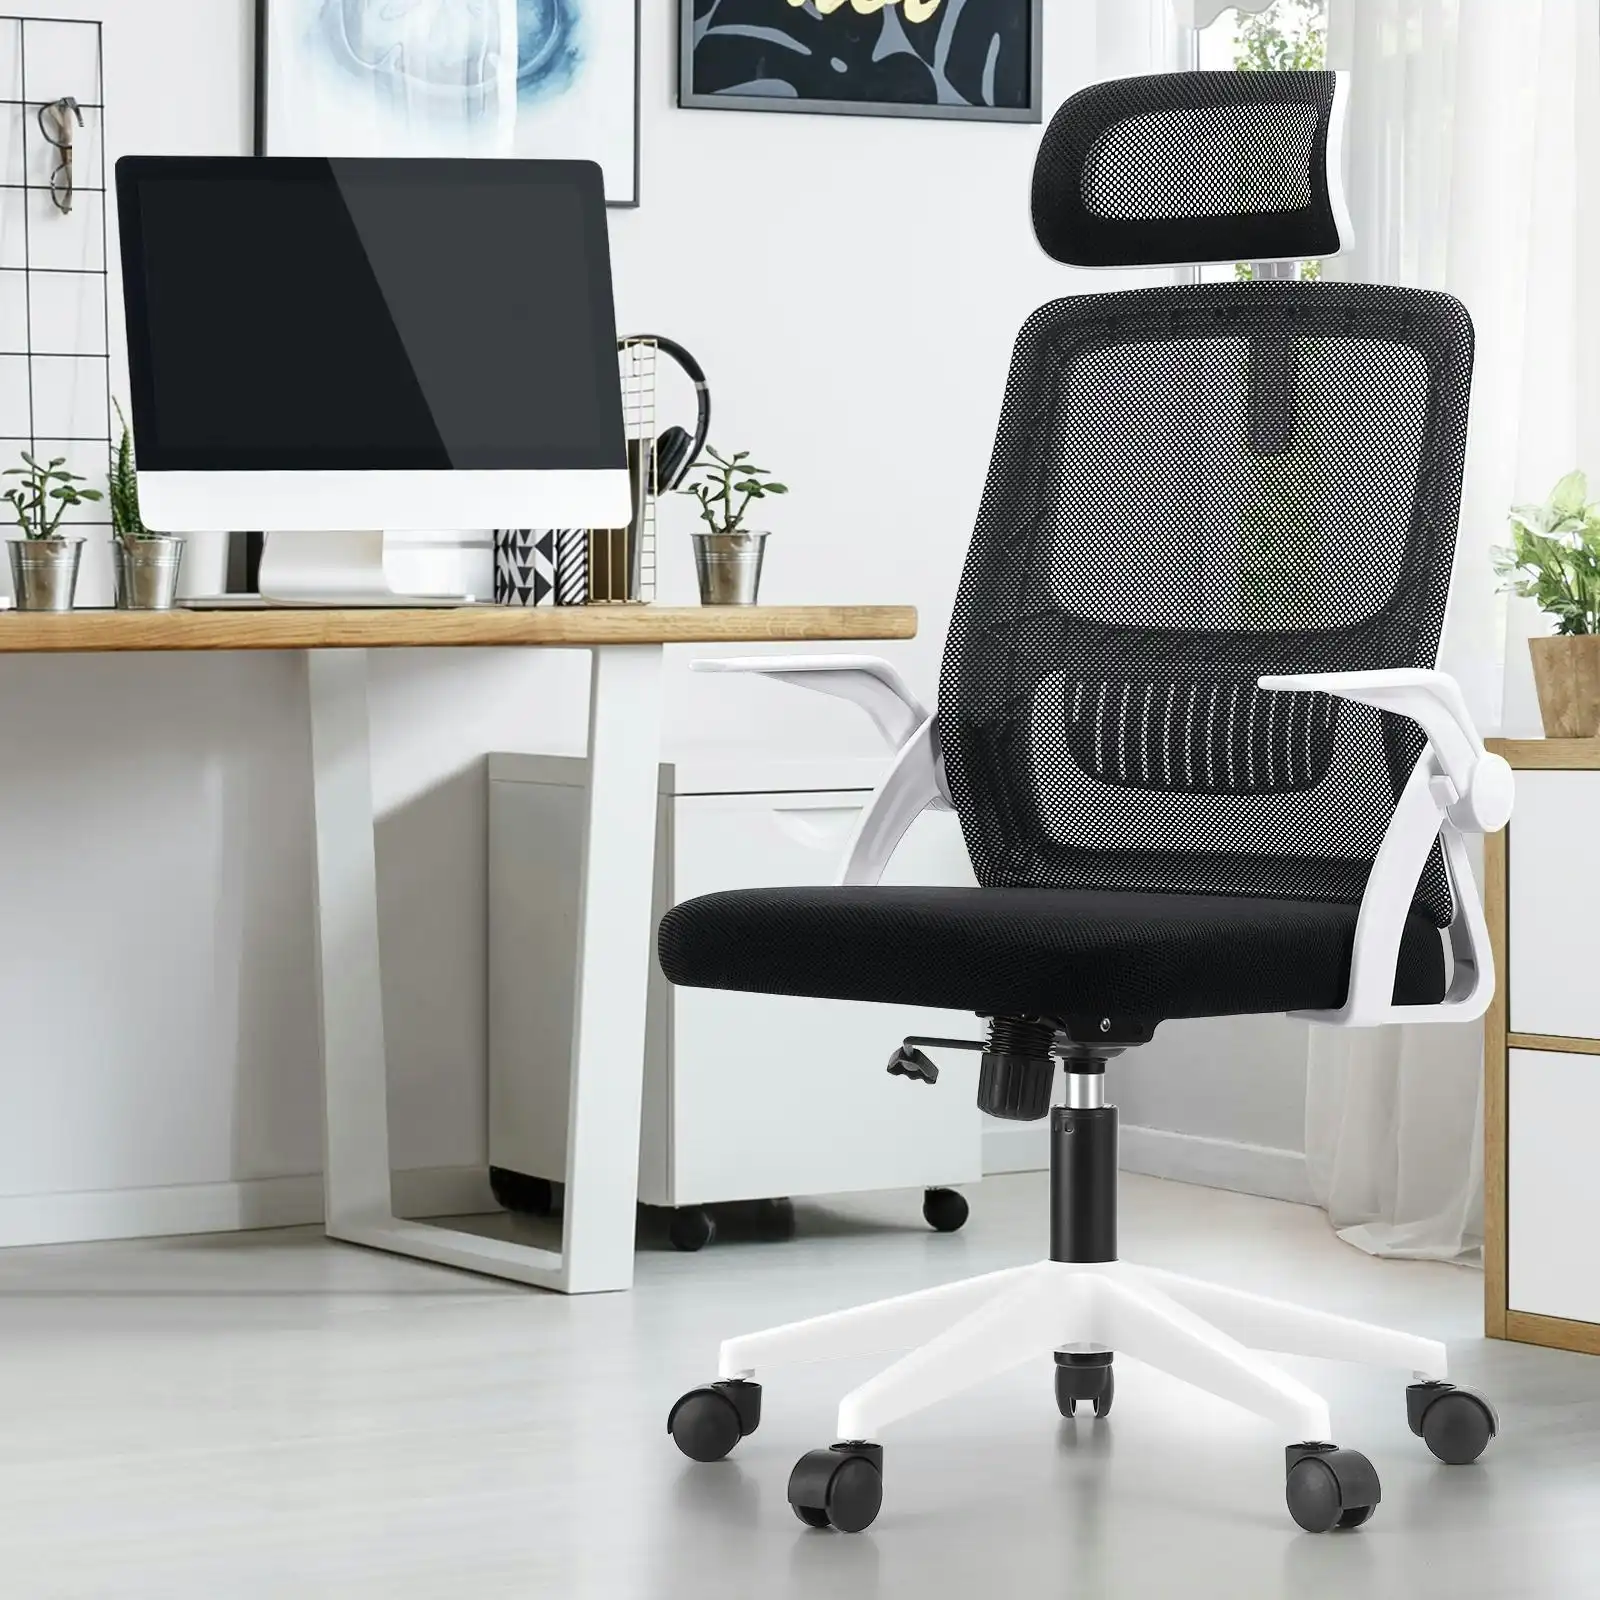 Oikiture Mesh Office Chair Executive Fabric Gaming Seat Racing Tilt Computer 1 White&Black